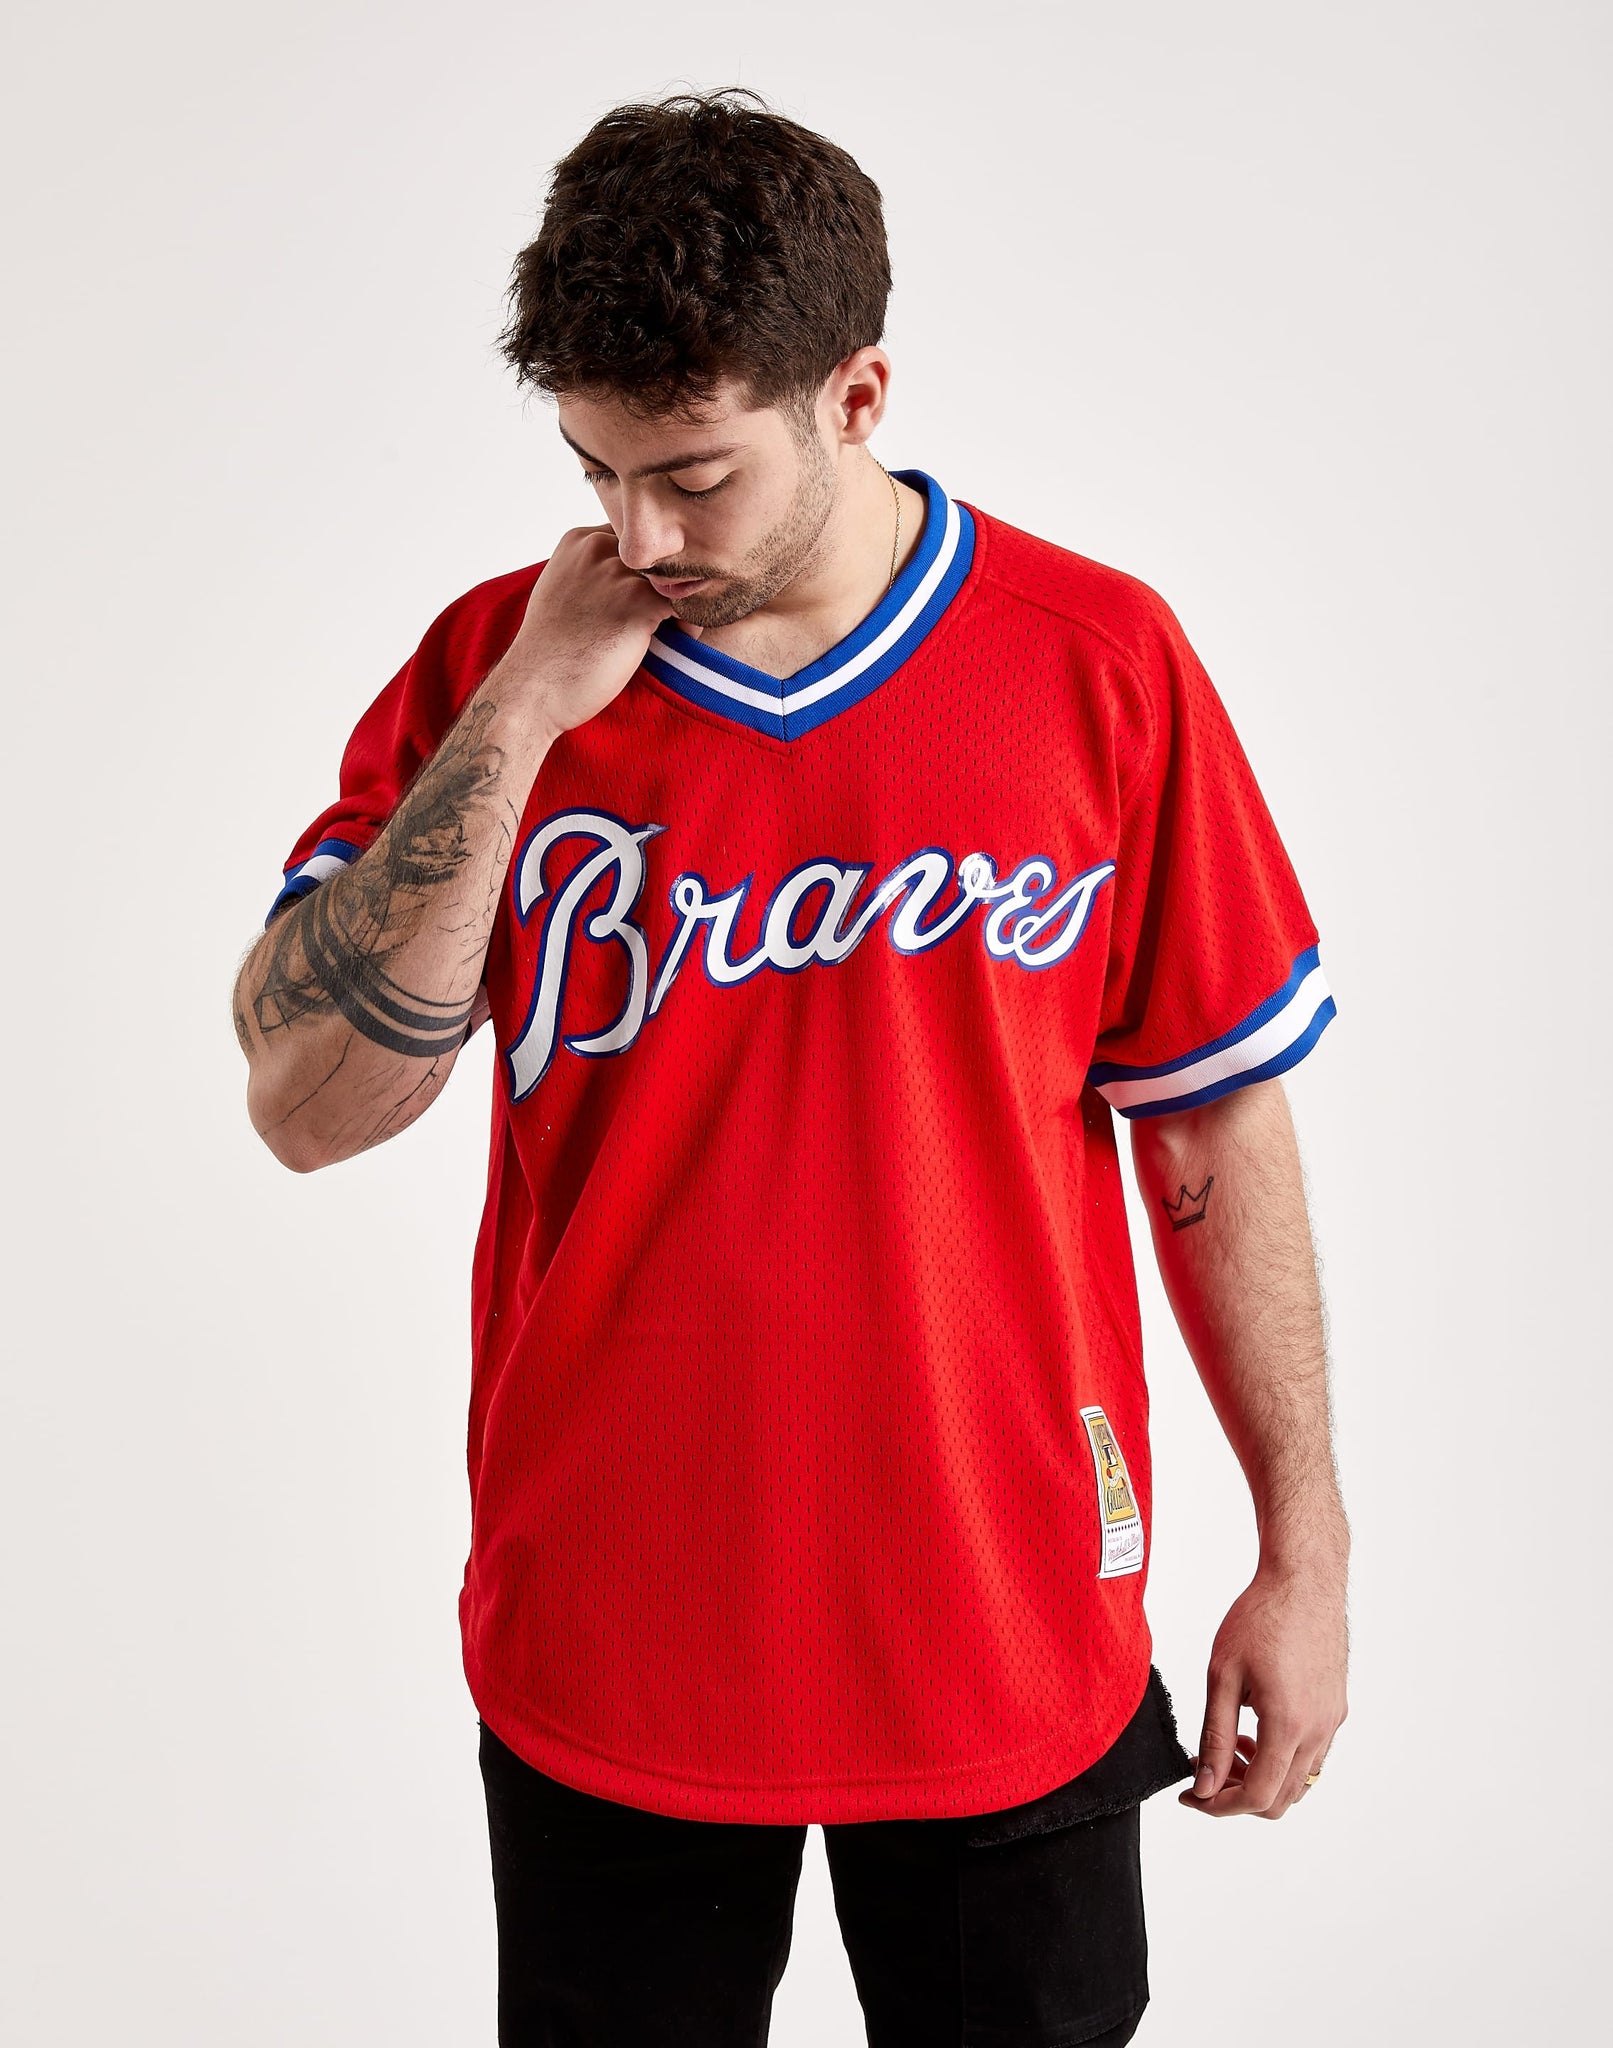 Youth Mitchell & Ness Dale Murphy Red Atlanta Braves Cooperstown Collection  Mesh Batting Practice Jersey